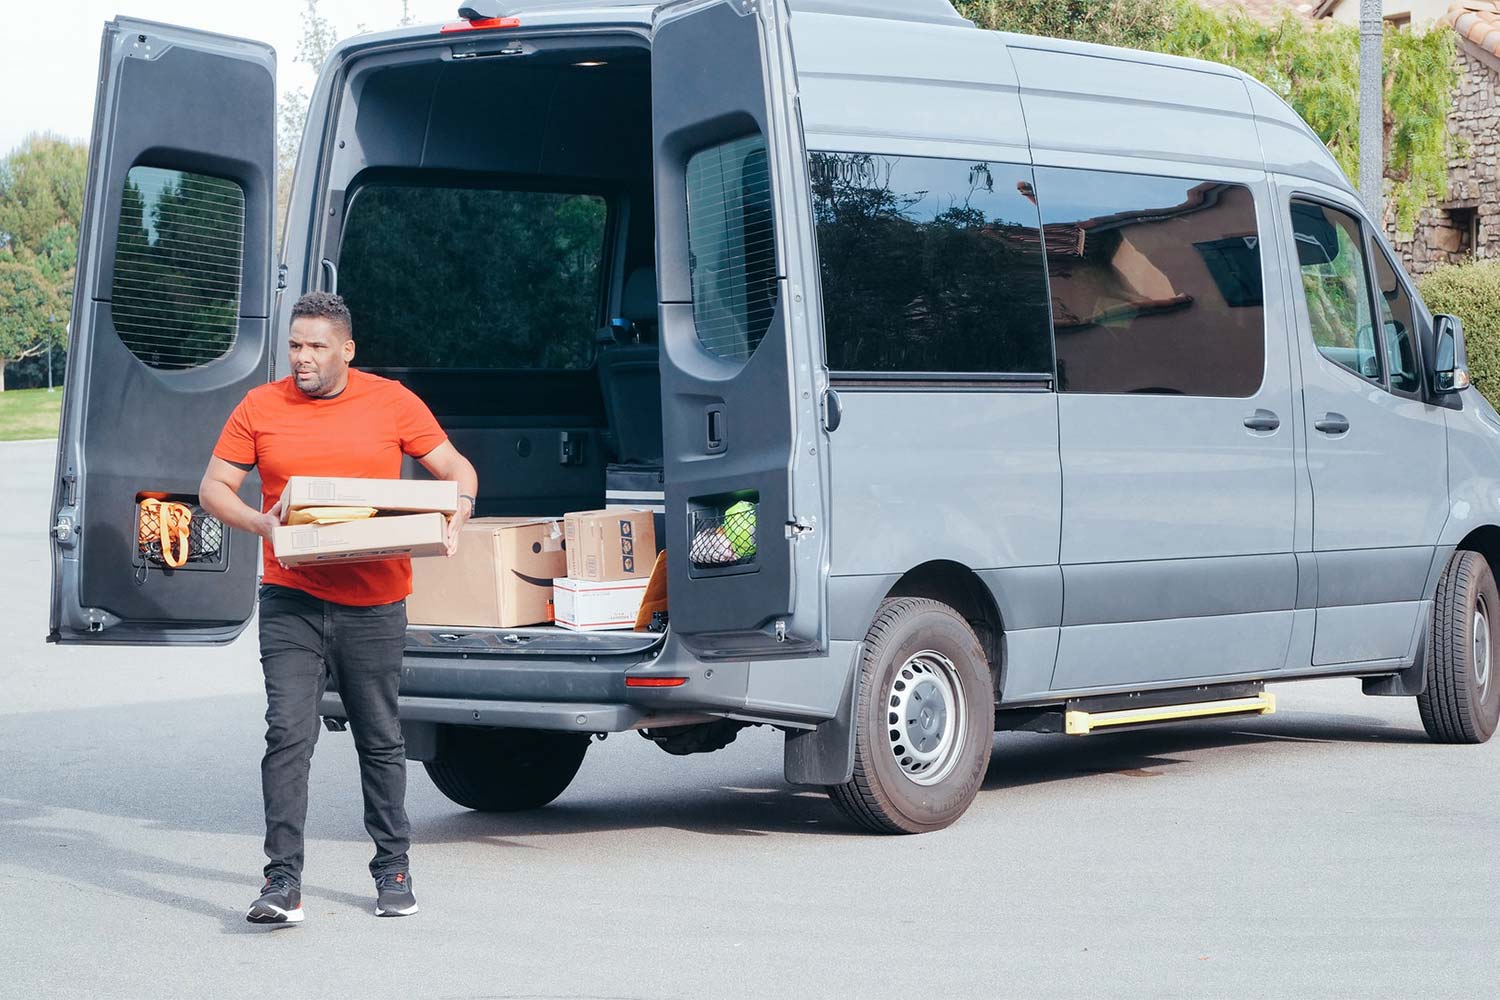 A Delivery Man Is Unloading Items From A Delivery Van